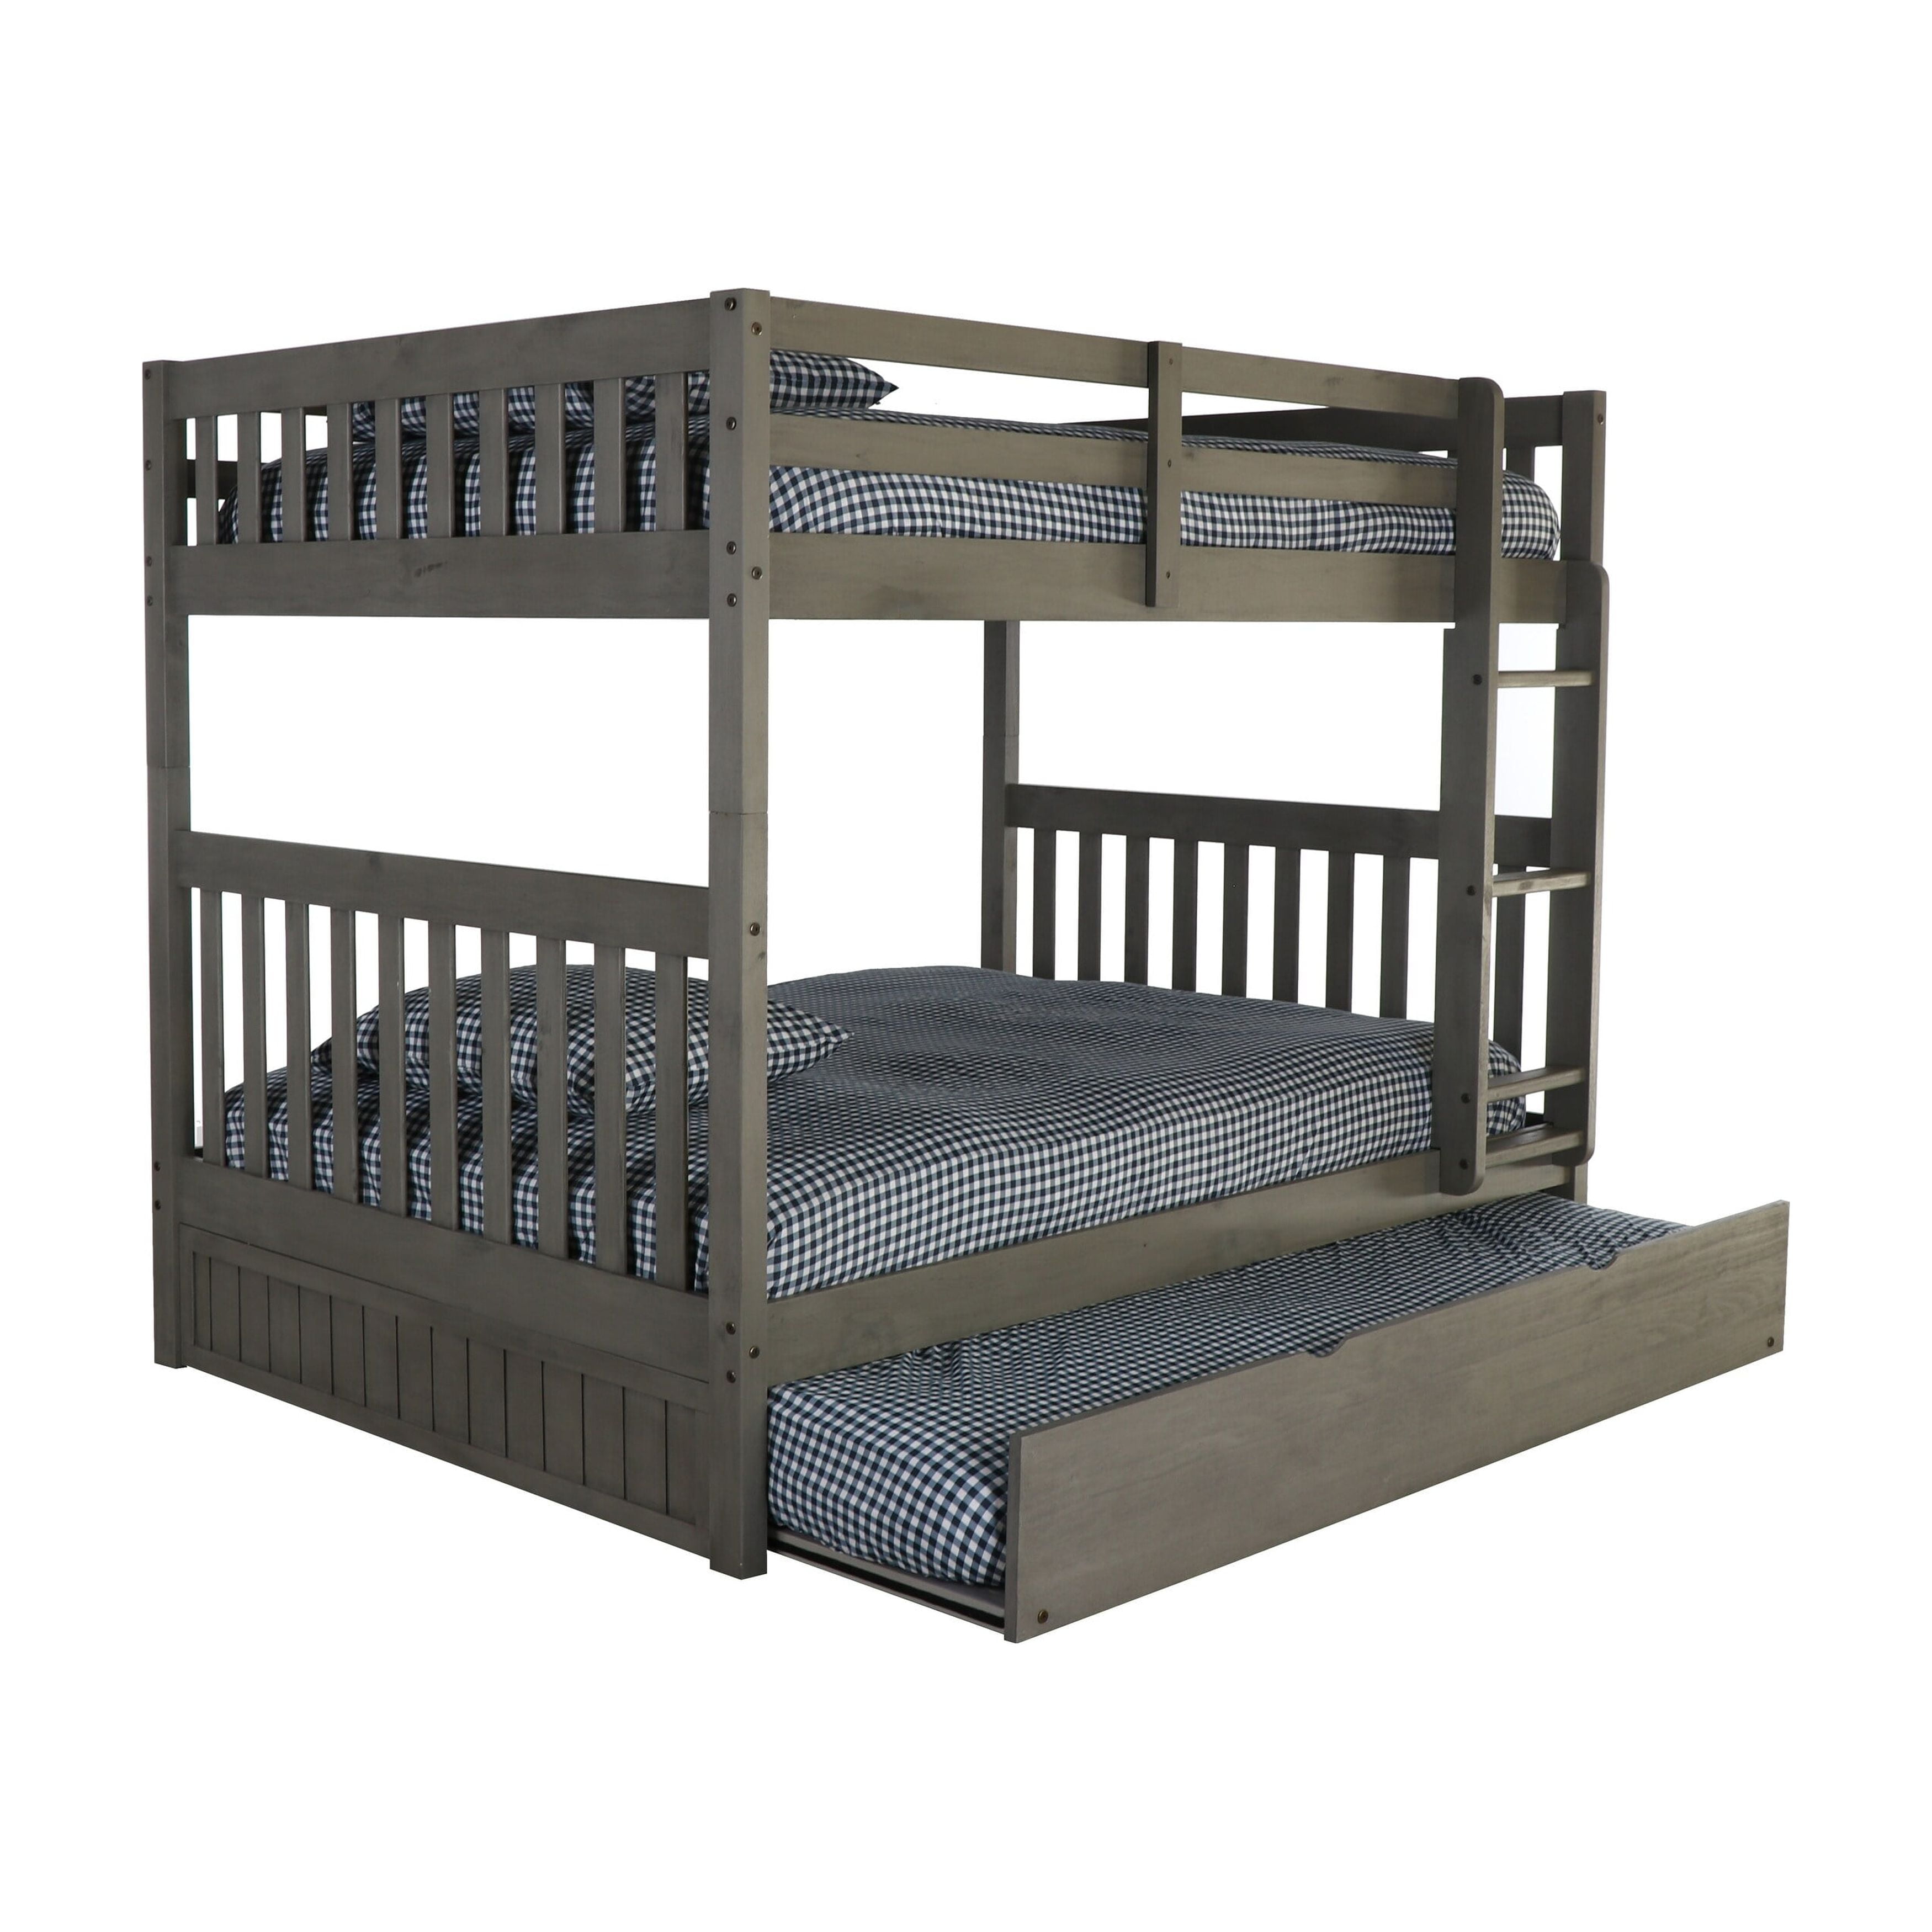 Picture of American Furniture Classics 83215-TRUN-KD 66 x 78 x 57 in. Full Over Full Bunk Bed with Twin Sized Trundle, Charcoal Grey